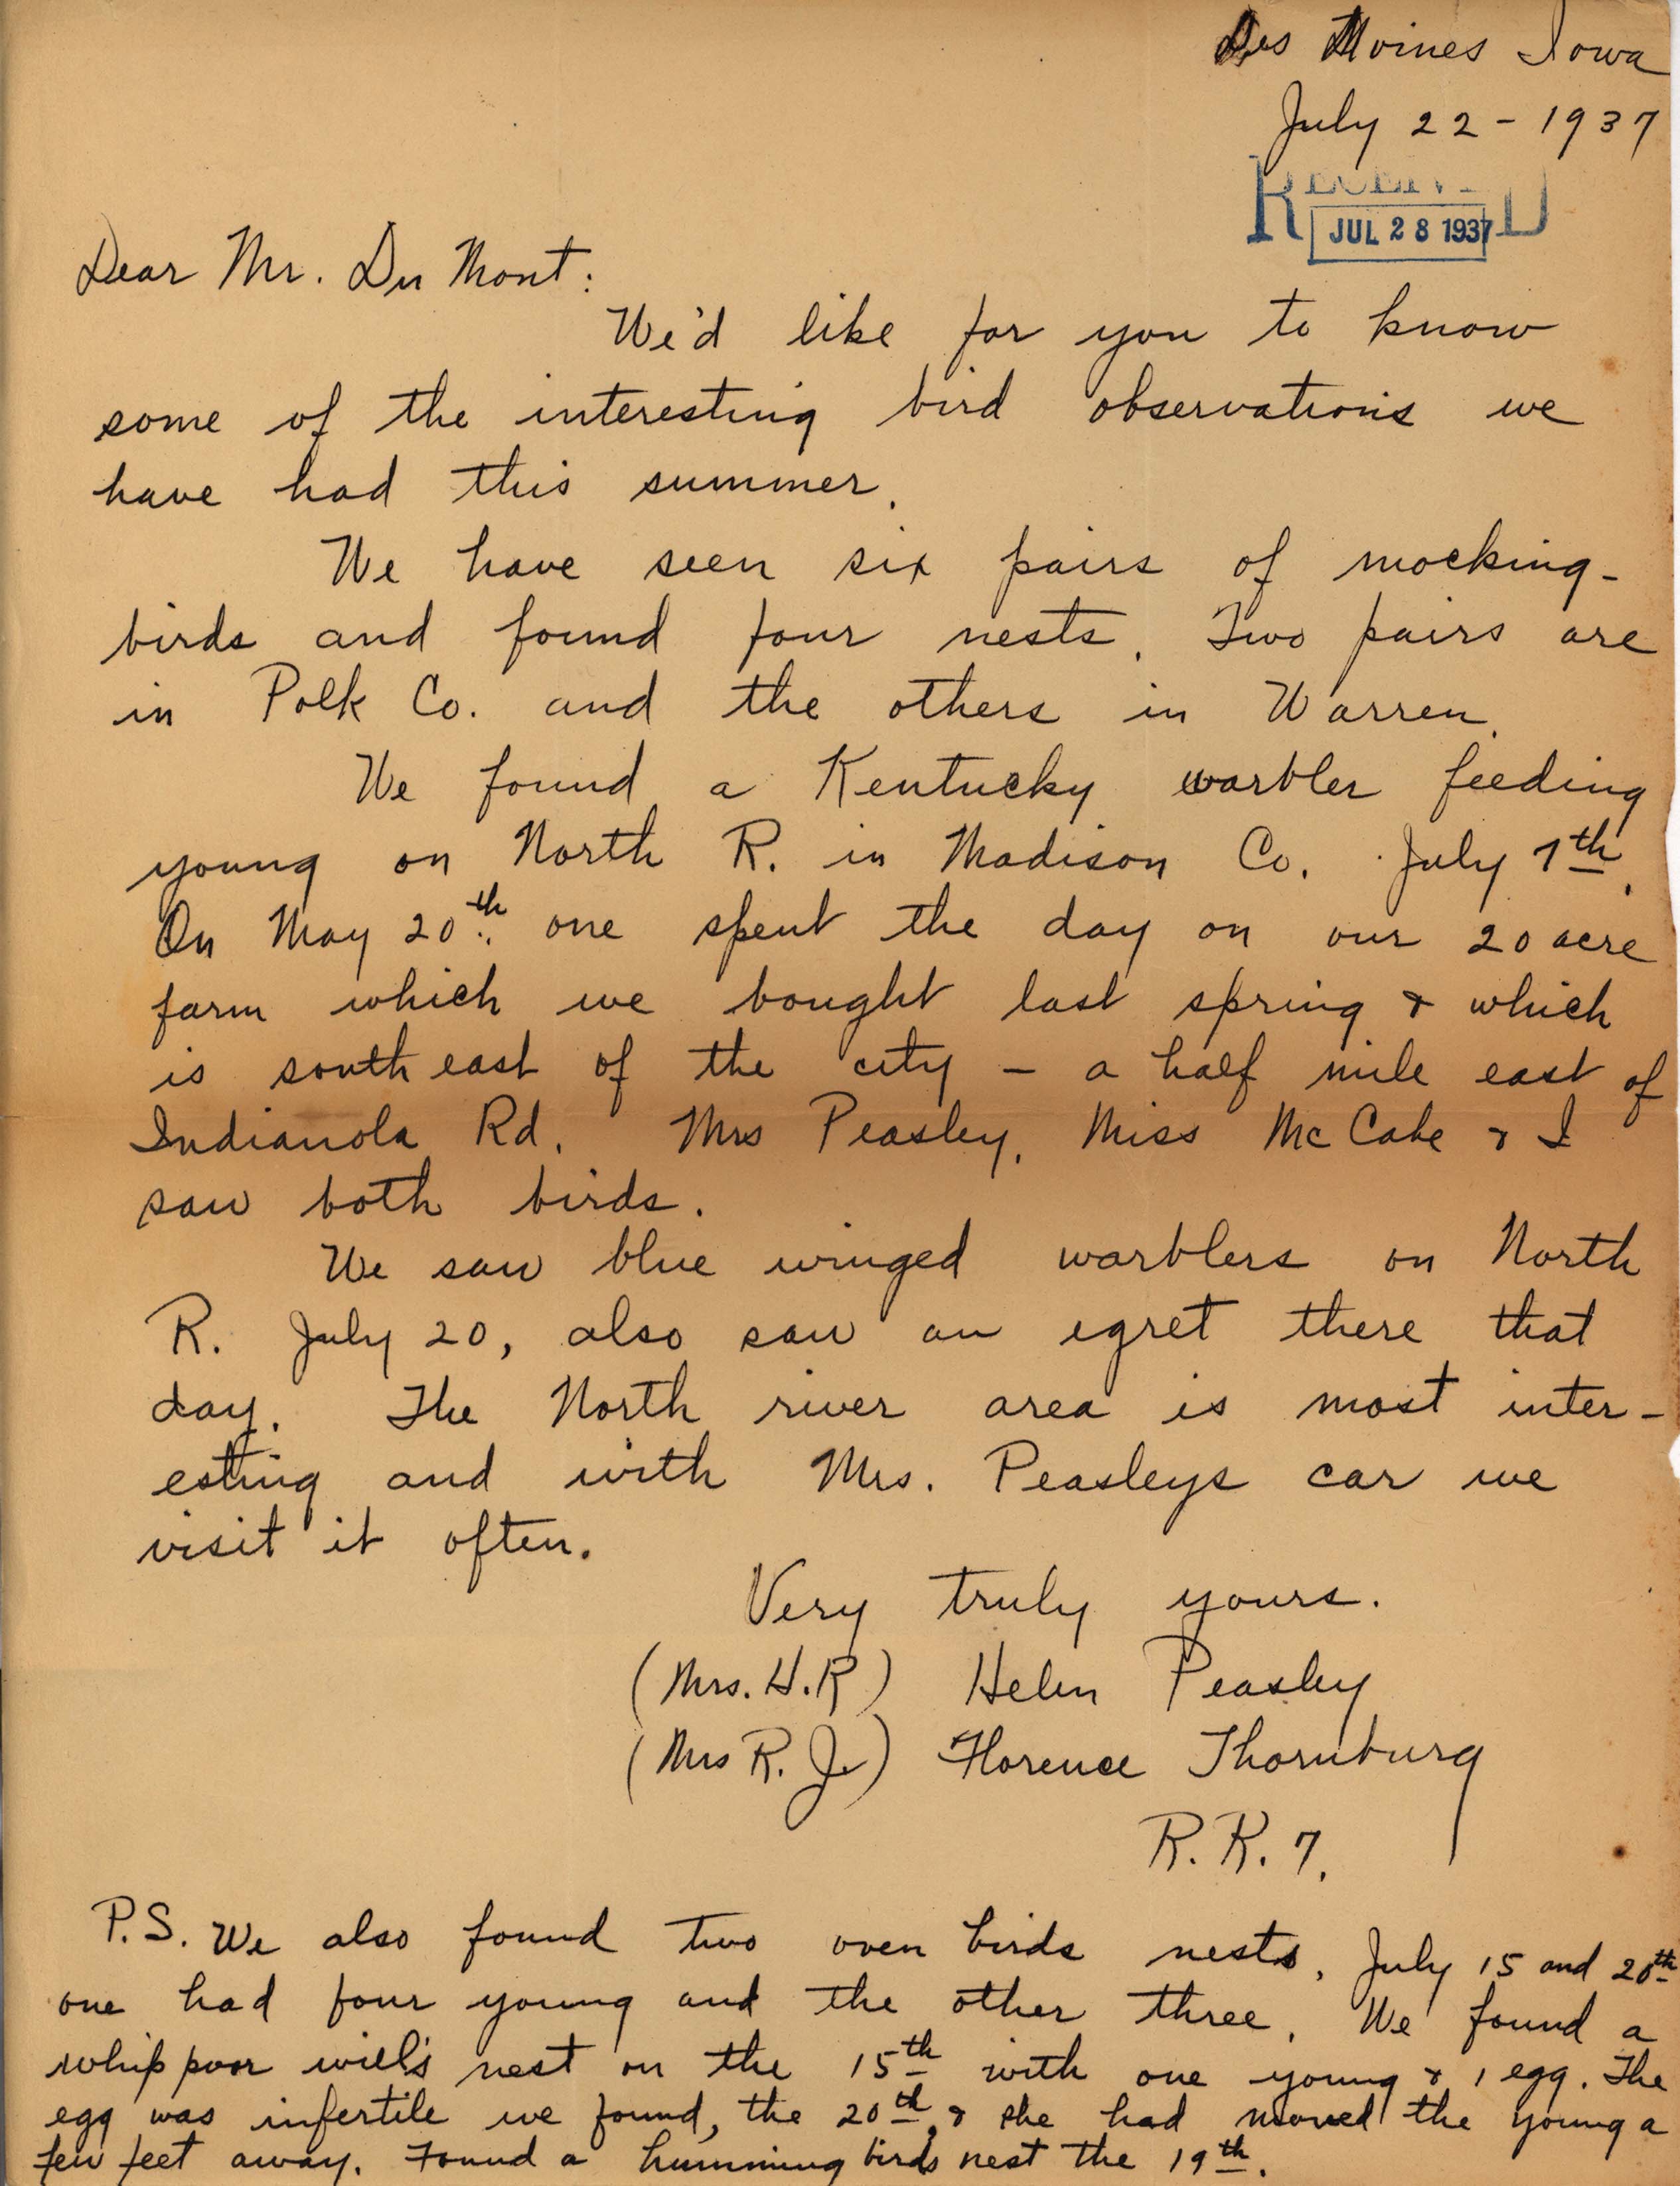 Helen Peasley and Florence Thornburg letter to Philip DuMont regarding bird observations, July 22, 1937